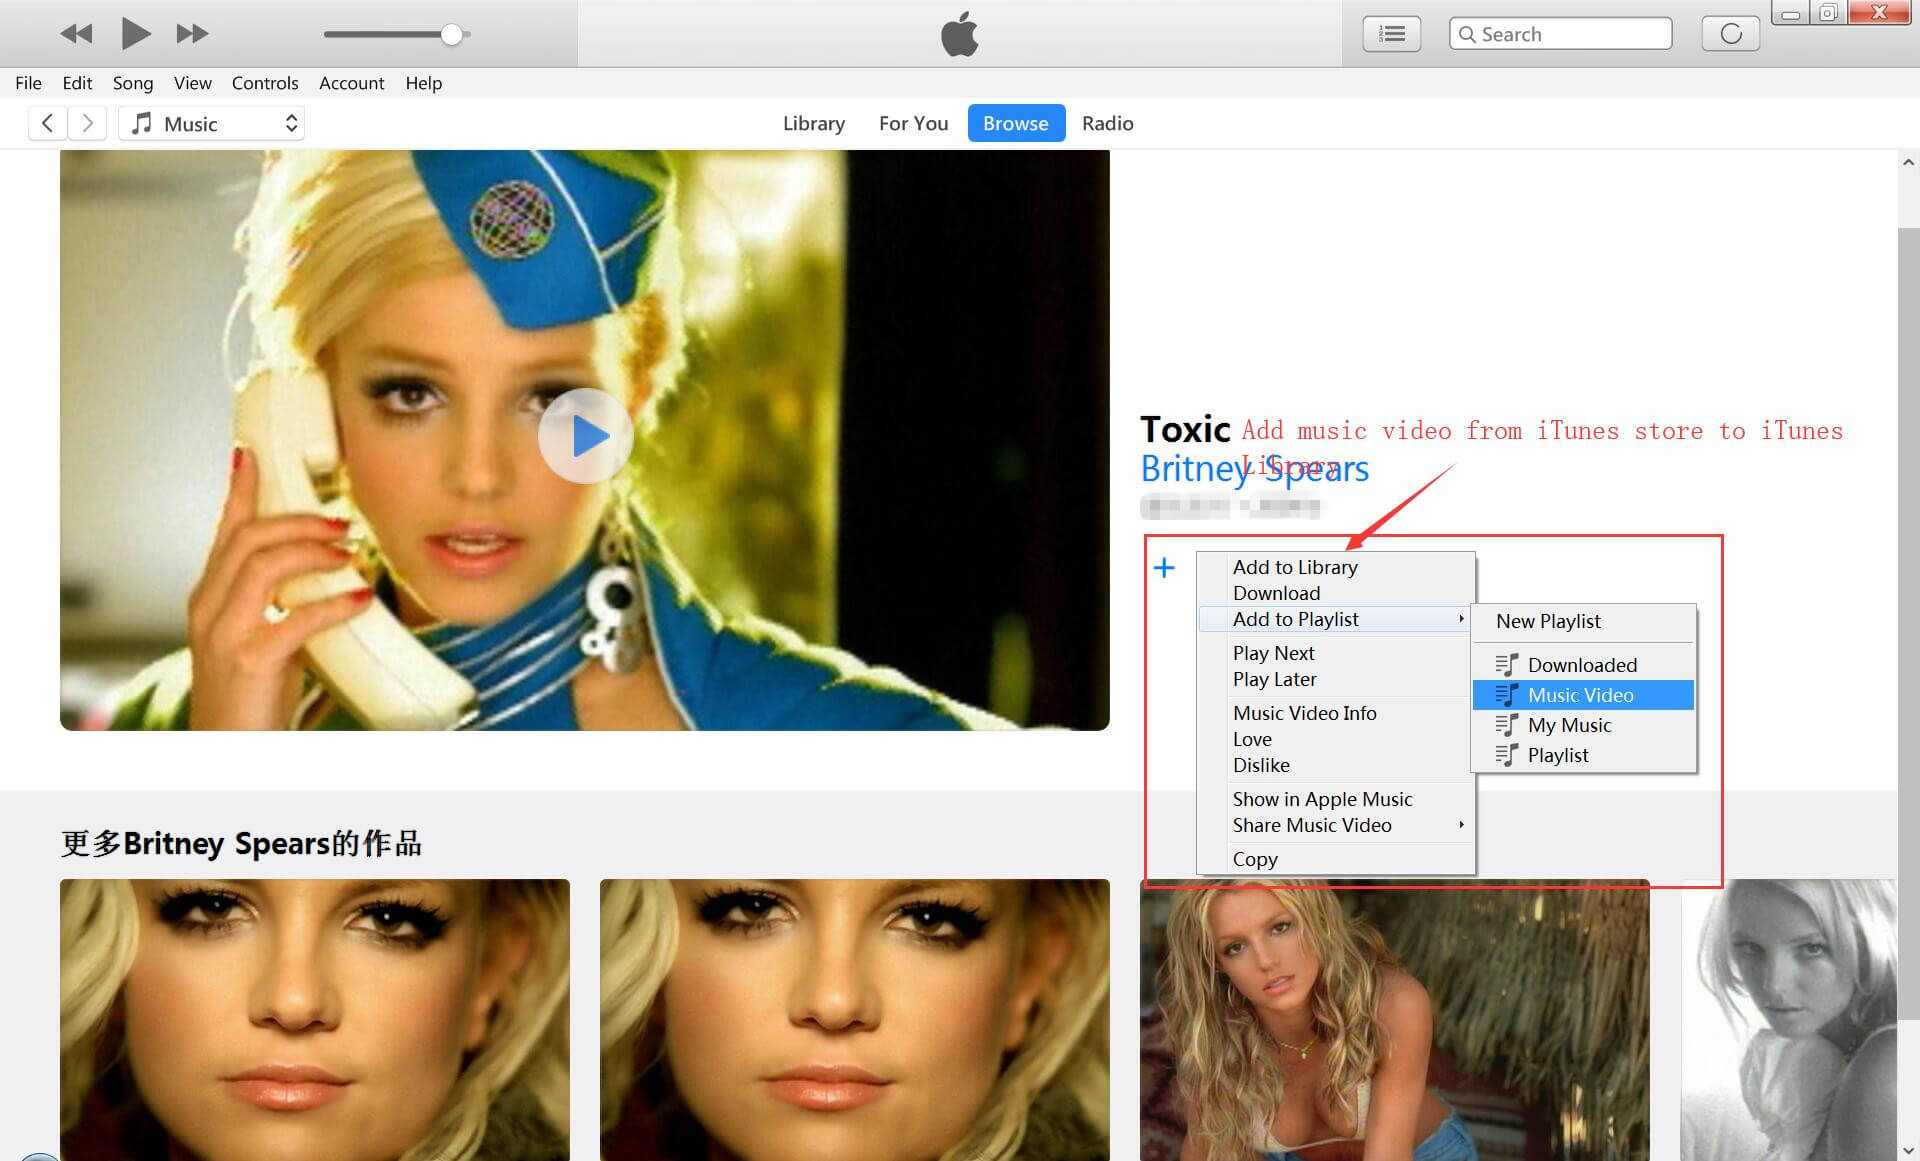 add-music-video-to-itunes-library-1